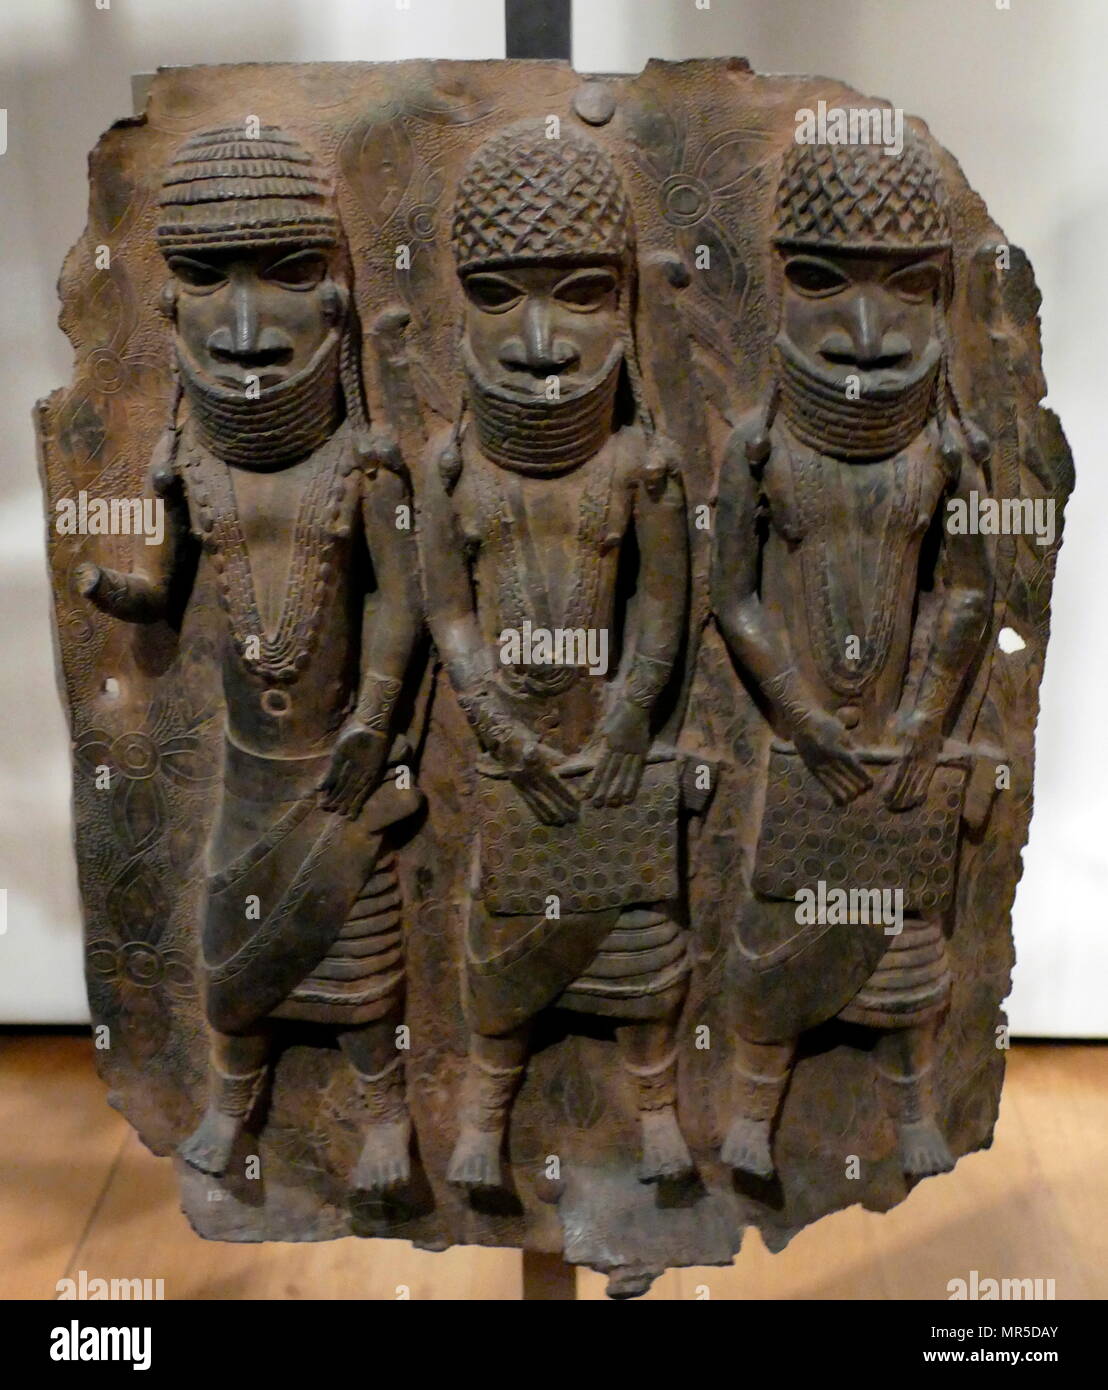 Benin Bronze High Resolution Stock Photography and Images - Alamy